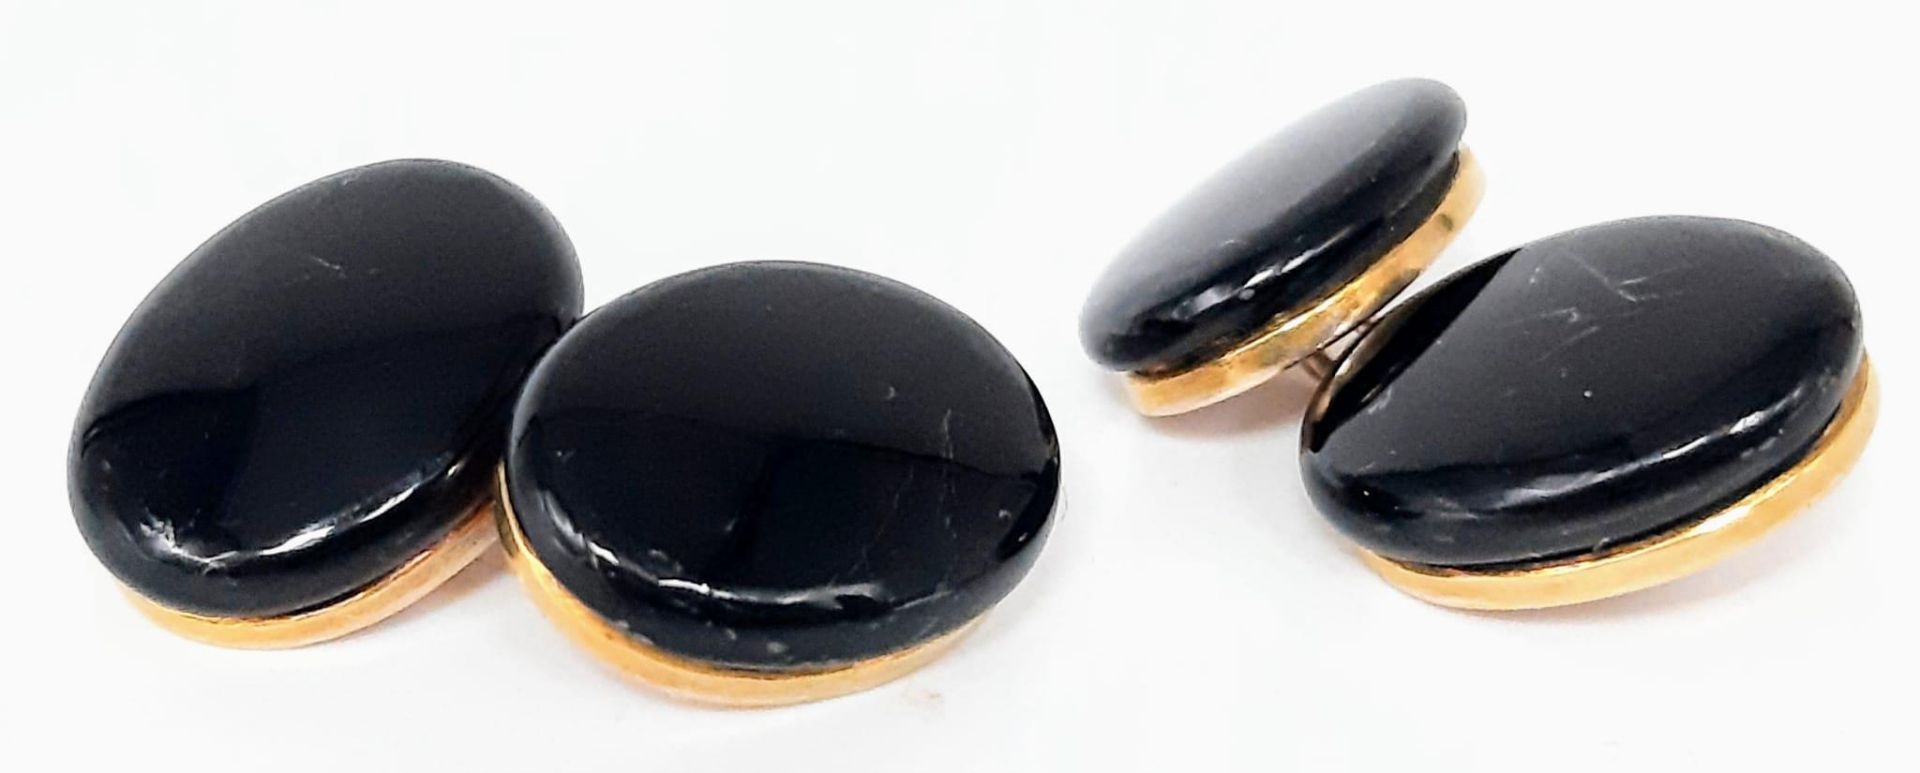 A Pair of Victorian English memorial onyx and gold oval cuff links - marked 10K gold. 9.71g total